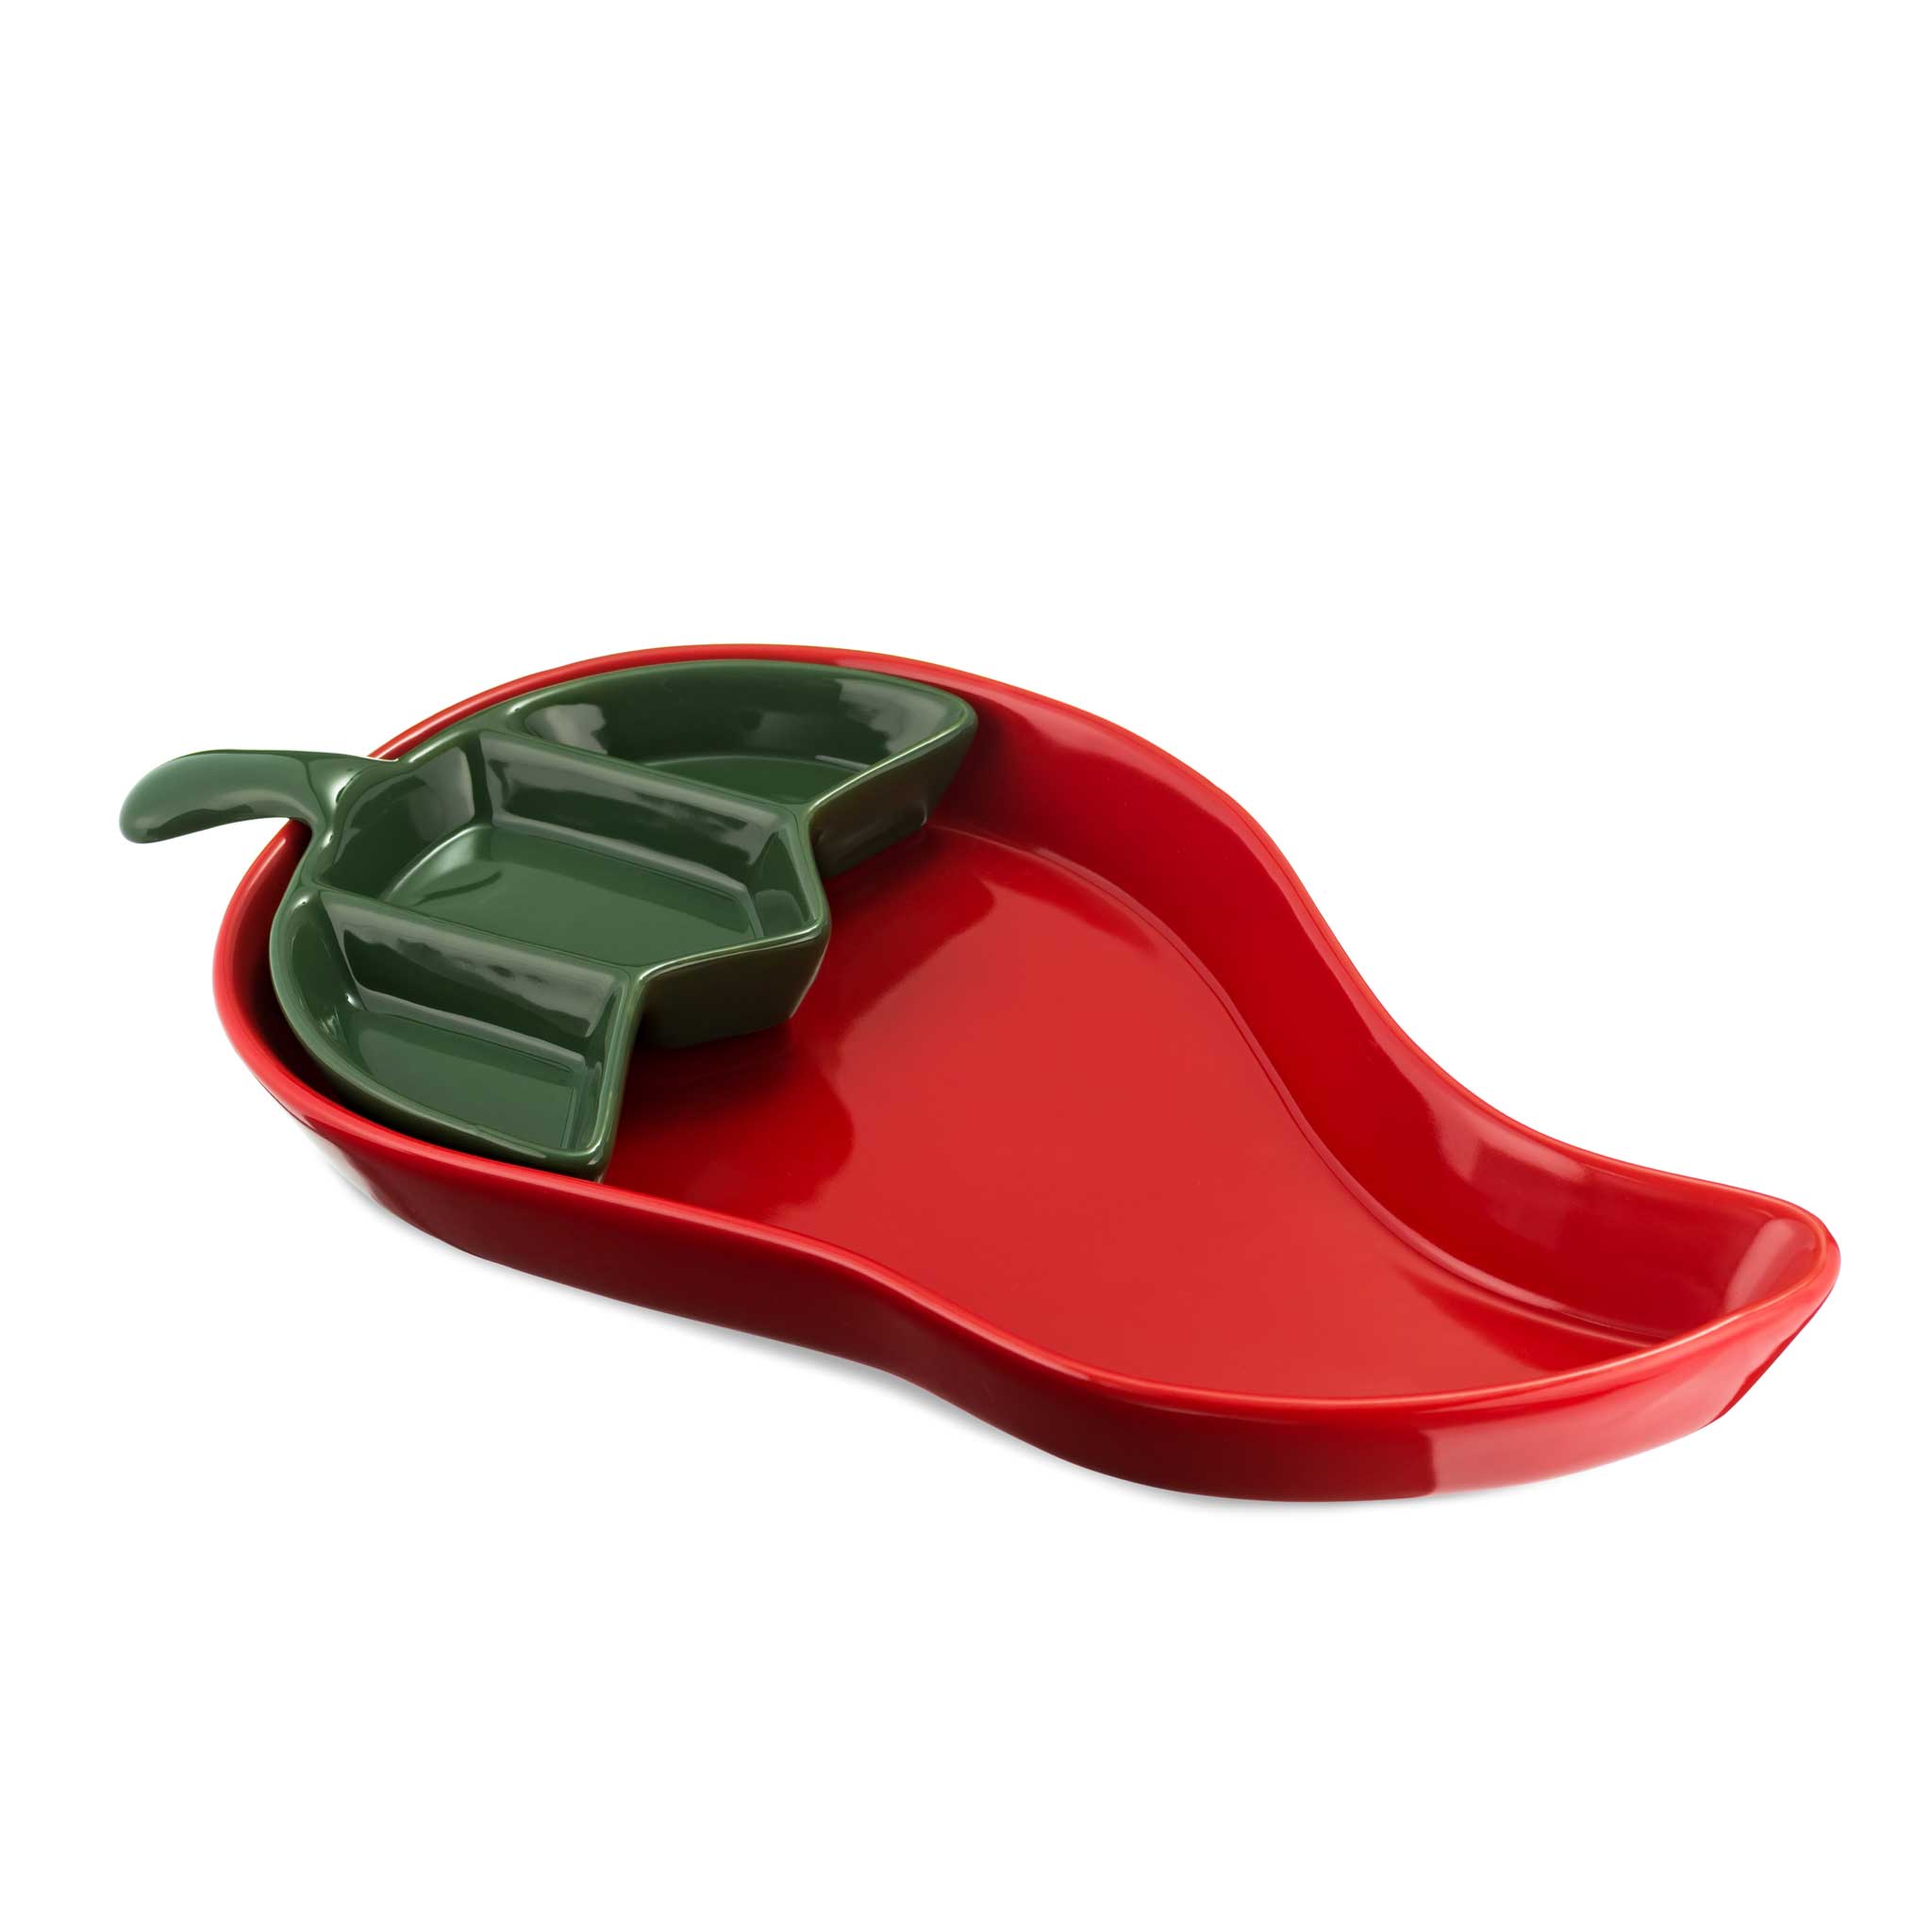 Red ceramic chilli shaped dish with green dip tray from China Blue